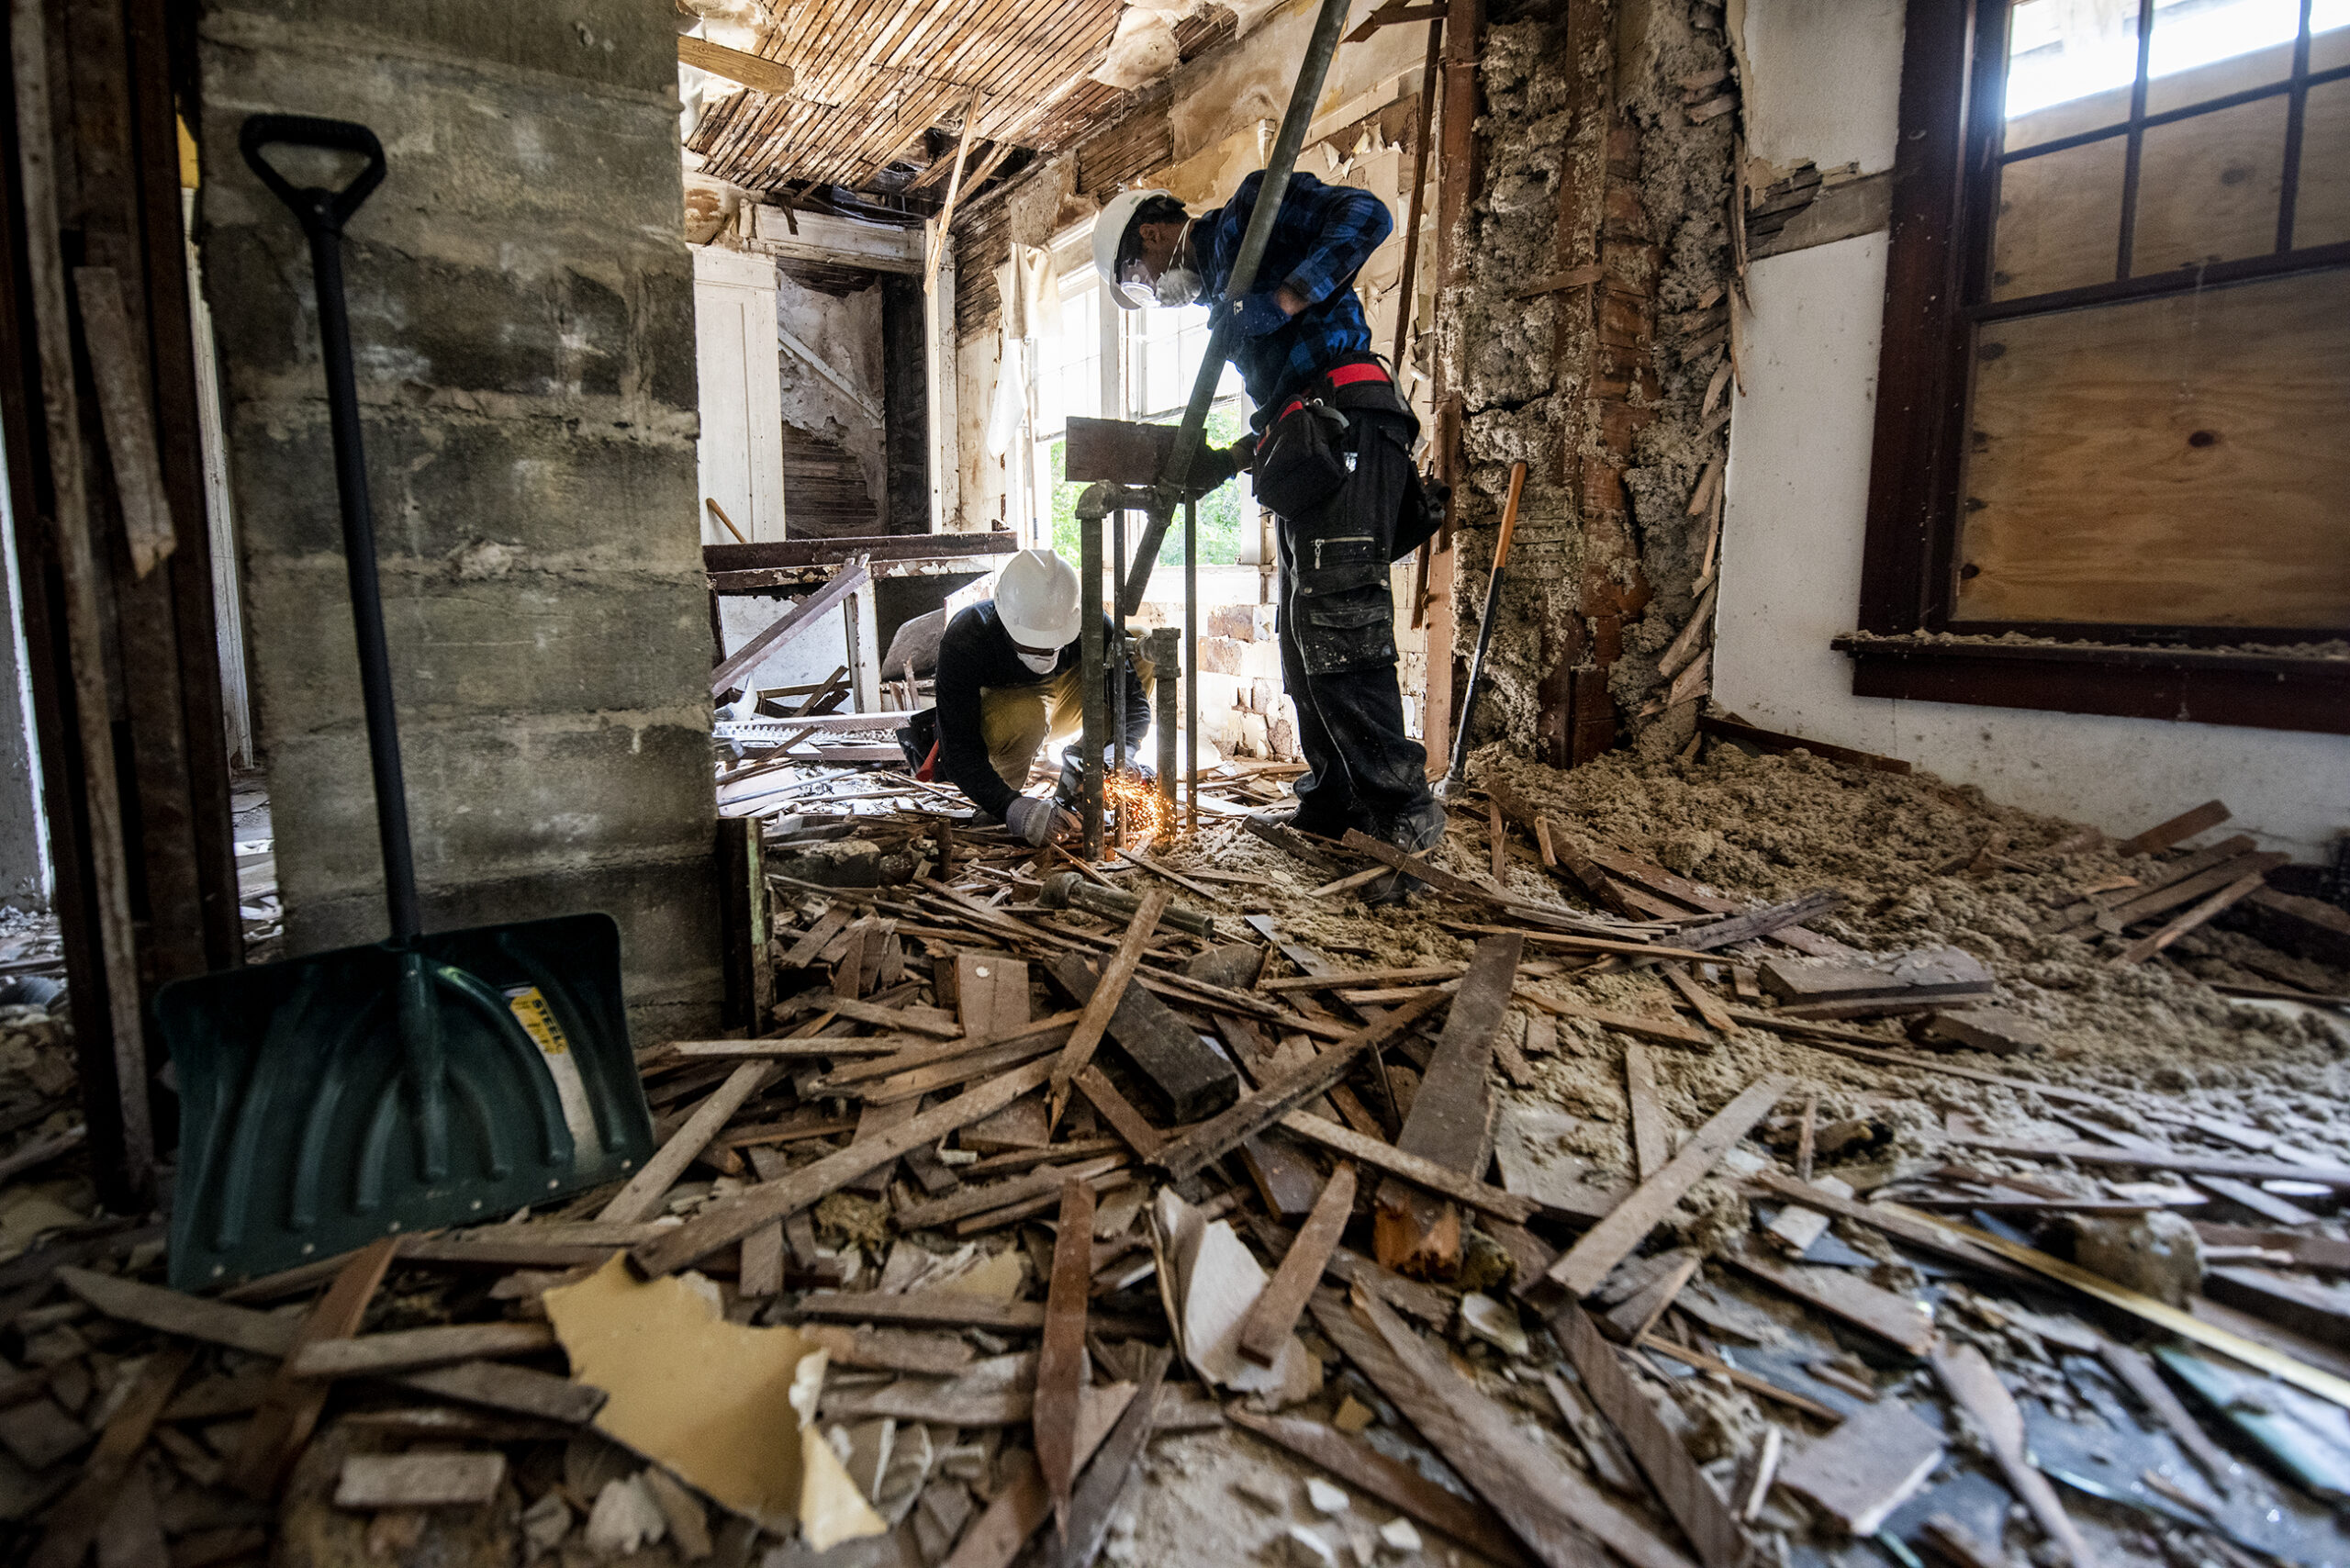 Wood and debris cover the floor as a worker further deconstructs the room.